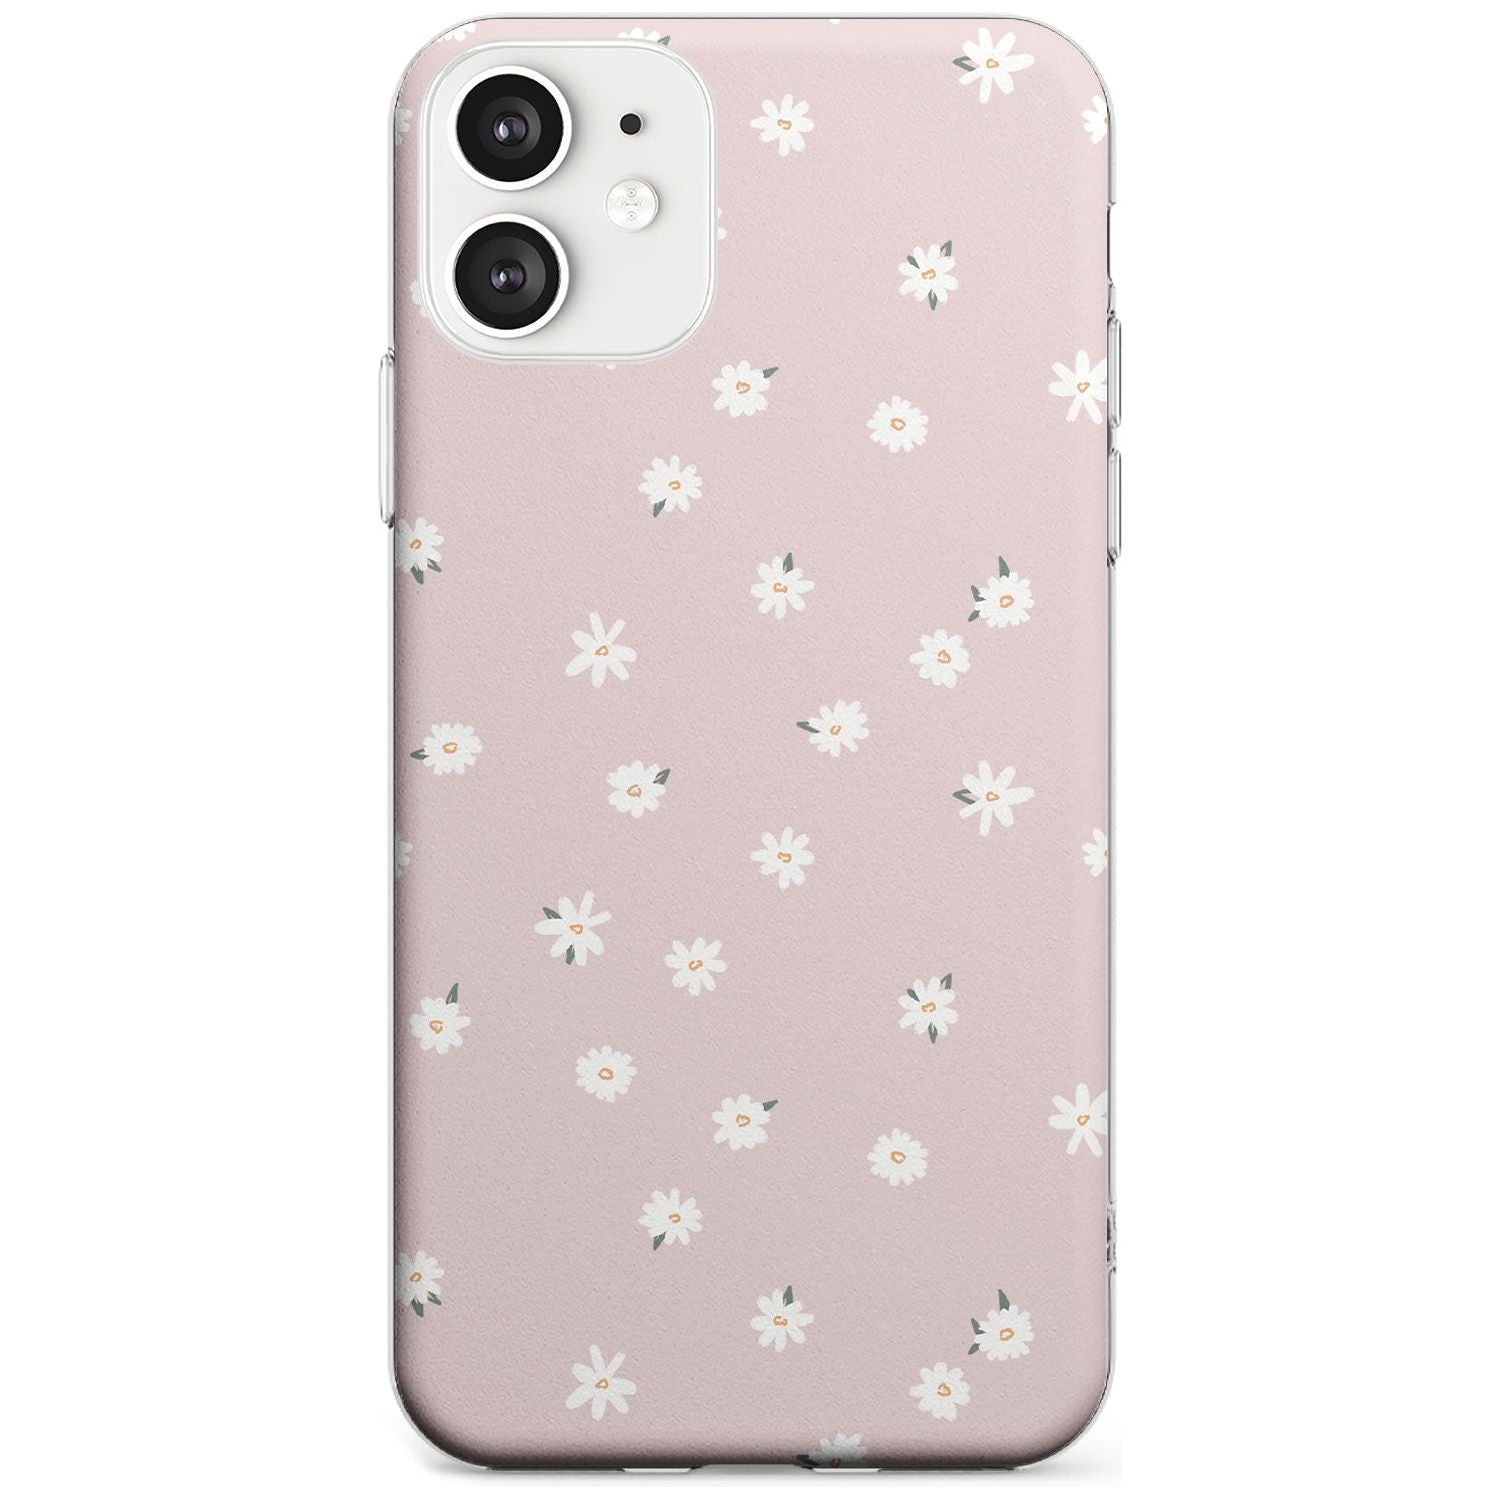 Painted Daises on Pink - Cute Floral Daisy Design Black Impact Phone Case for iPhone 11